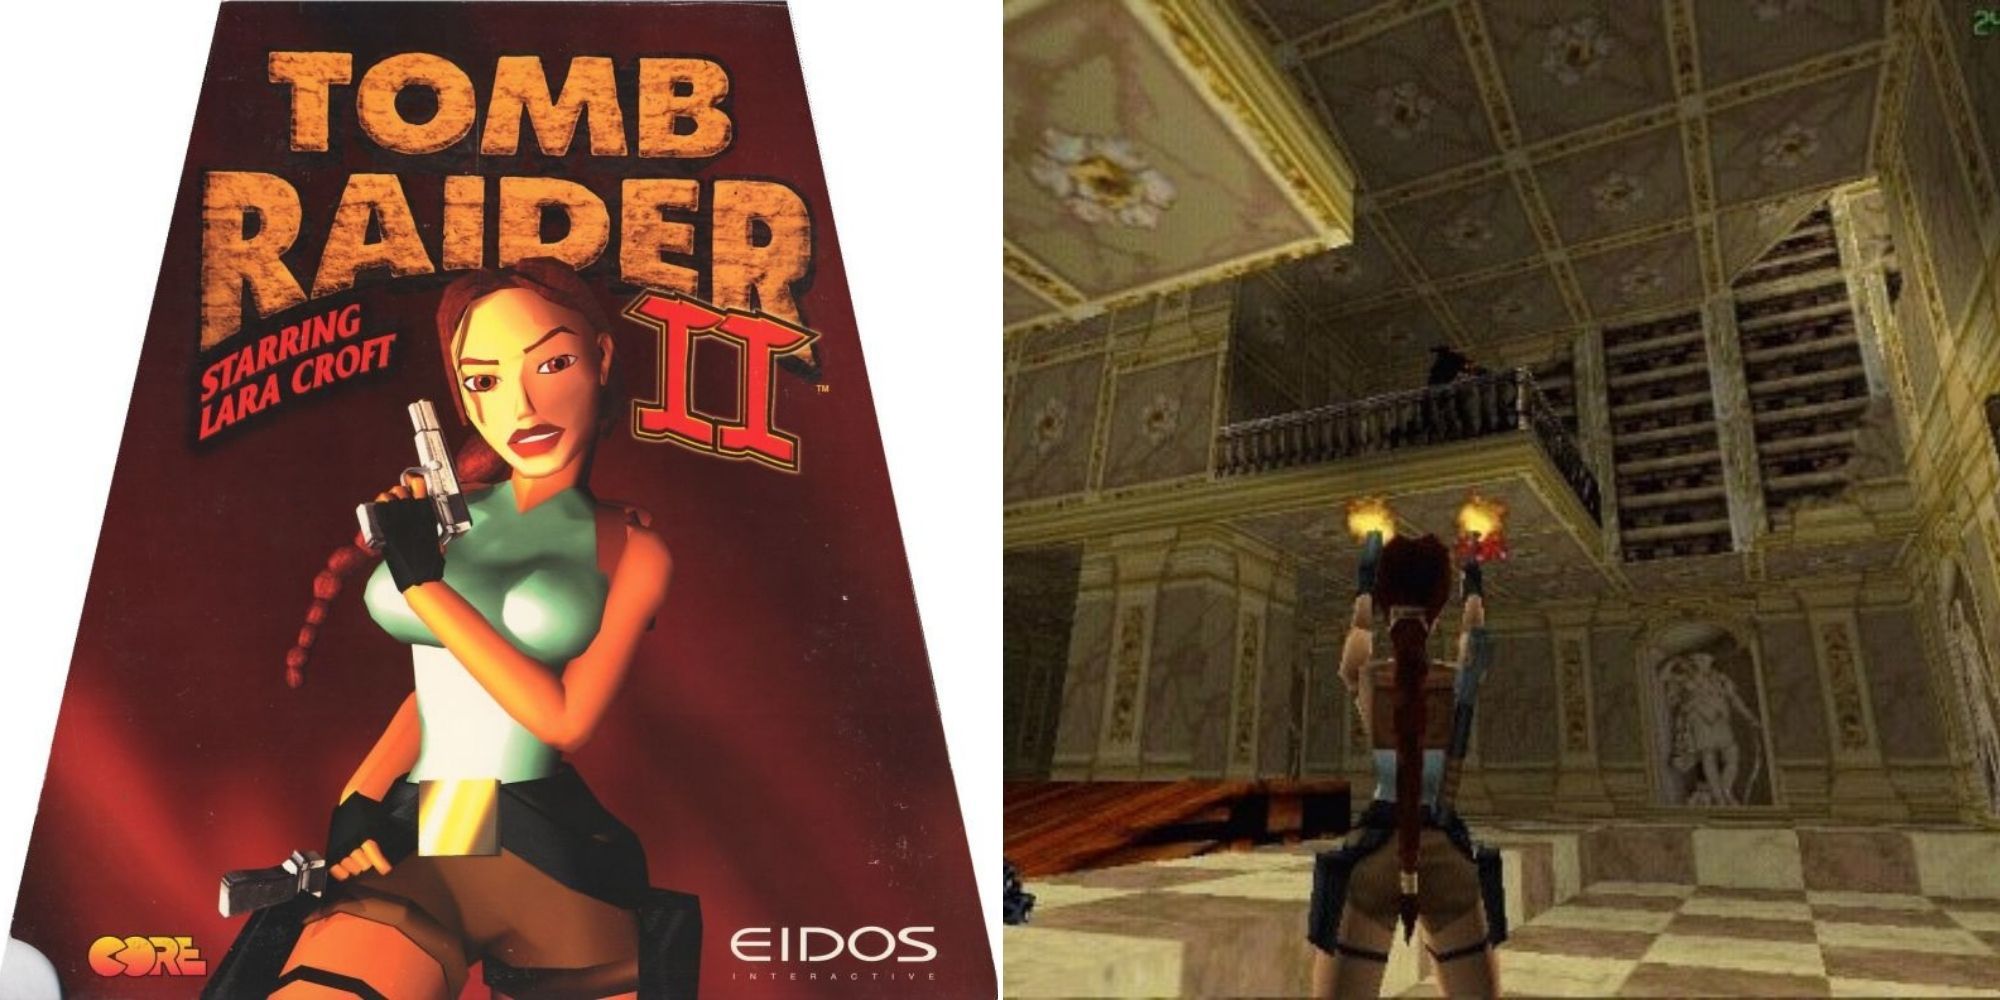 Tomb Raider II - Cover art and Lara Croft in a tomb shooting up at an enemy